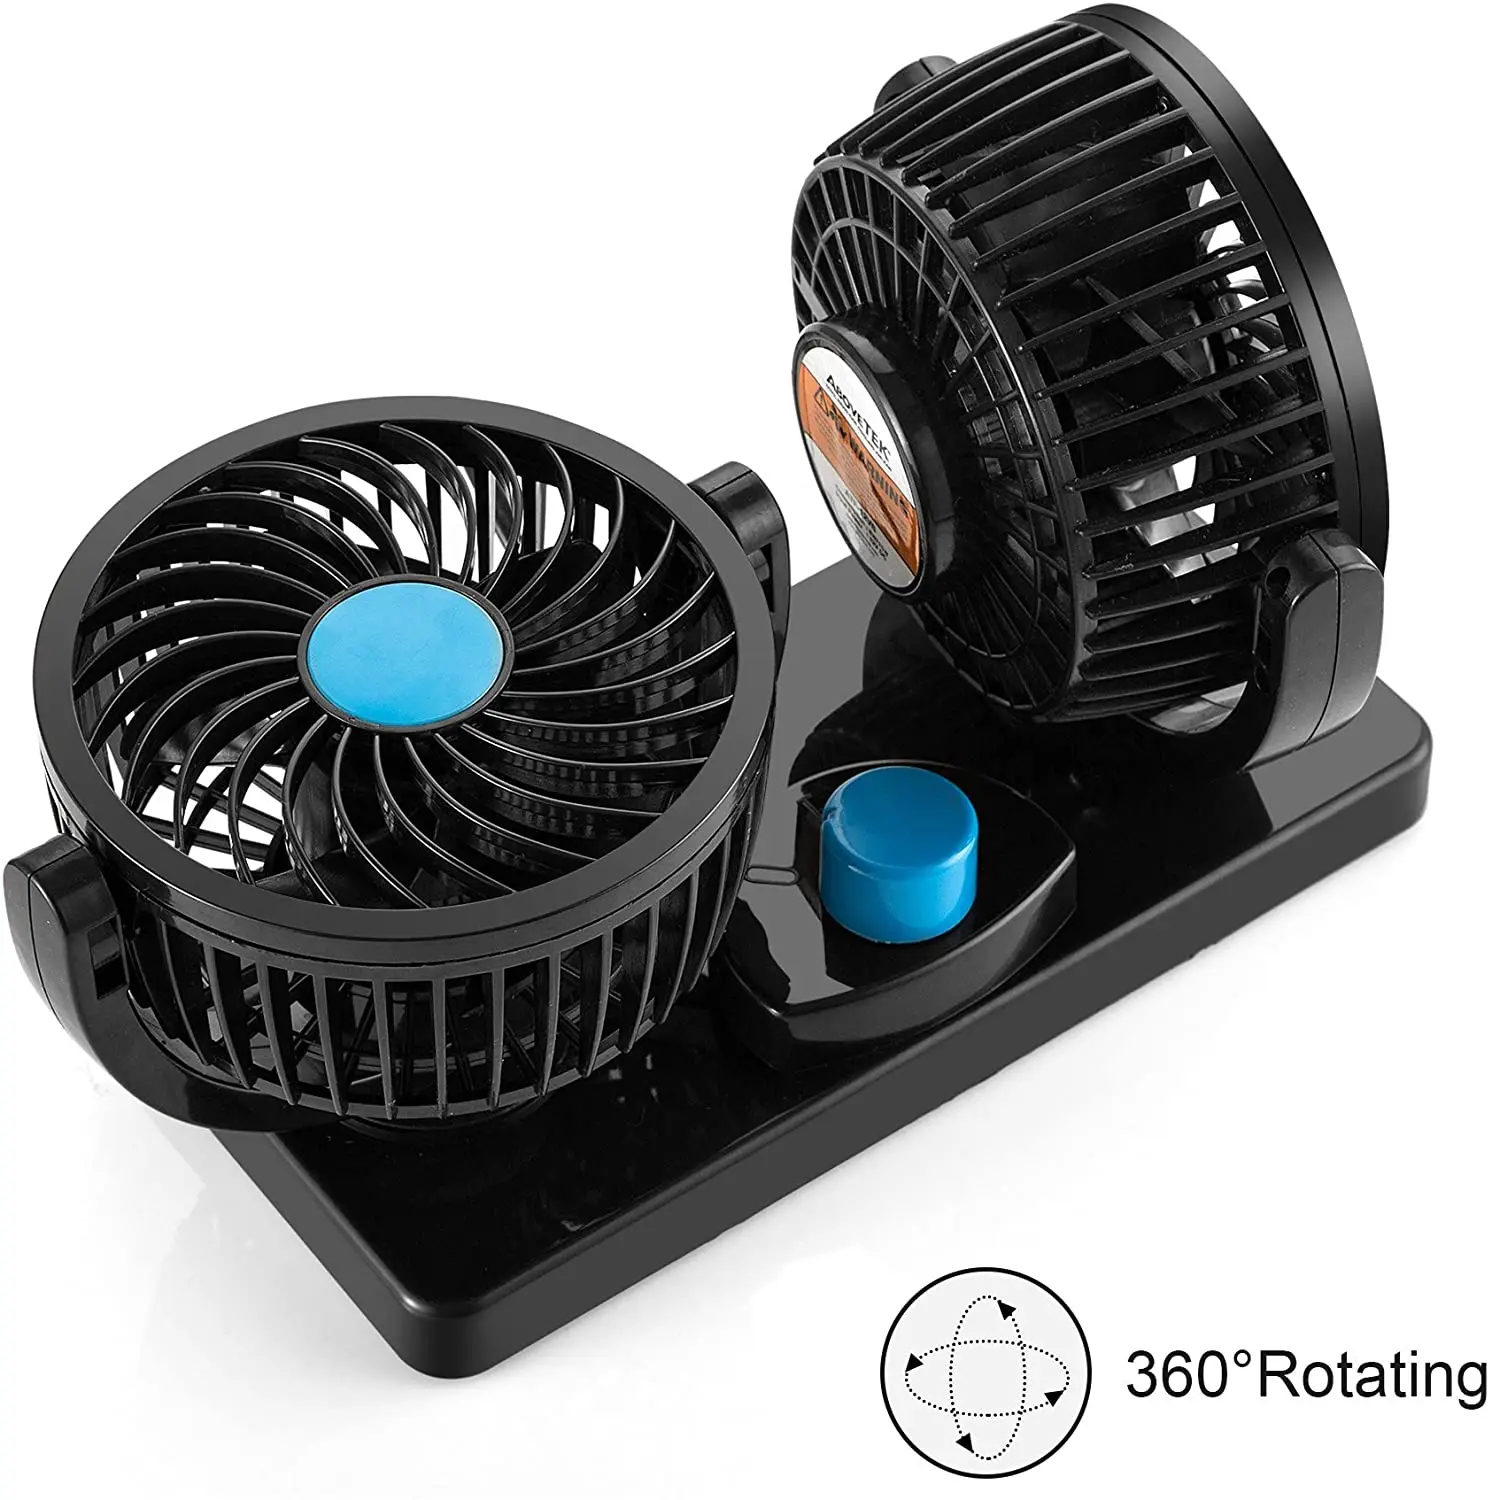 BestFire 360 Rotating Free Adjustment Dual Head Car Auto Cooling Air Fan Powerful Quiet 2 Speed Rotatable 12V Ventilation Dashboard Electric Car Fans Summer Cooling Air Circulator Low Noise 